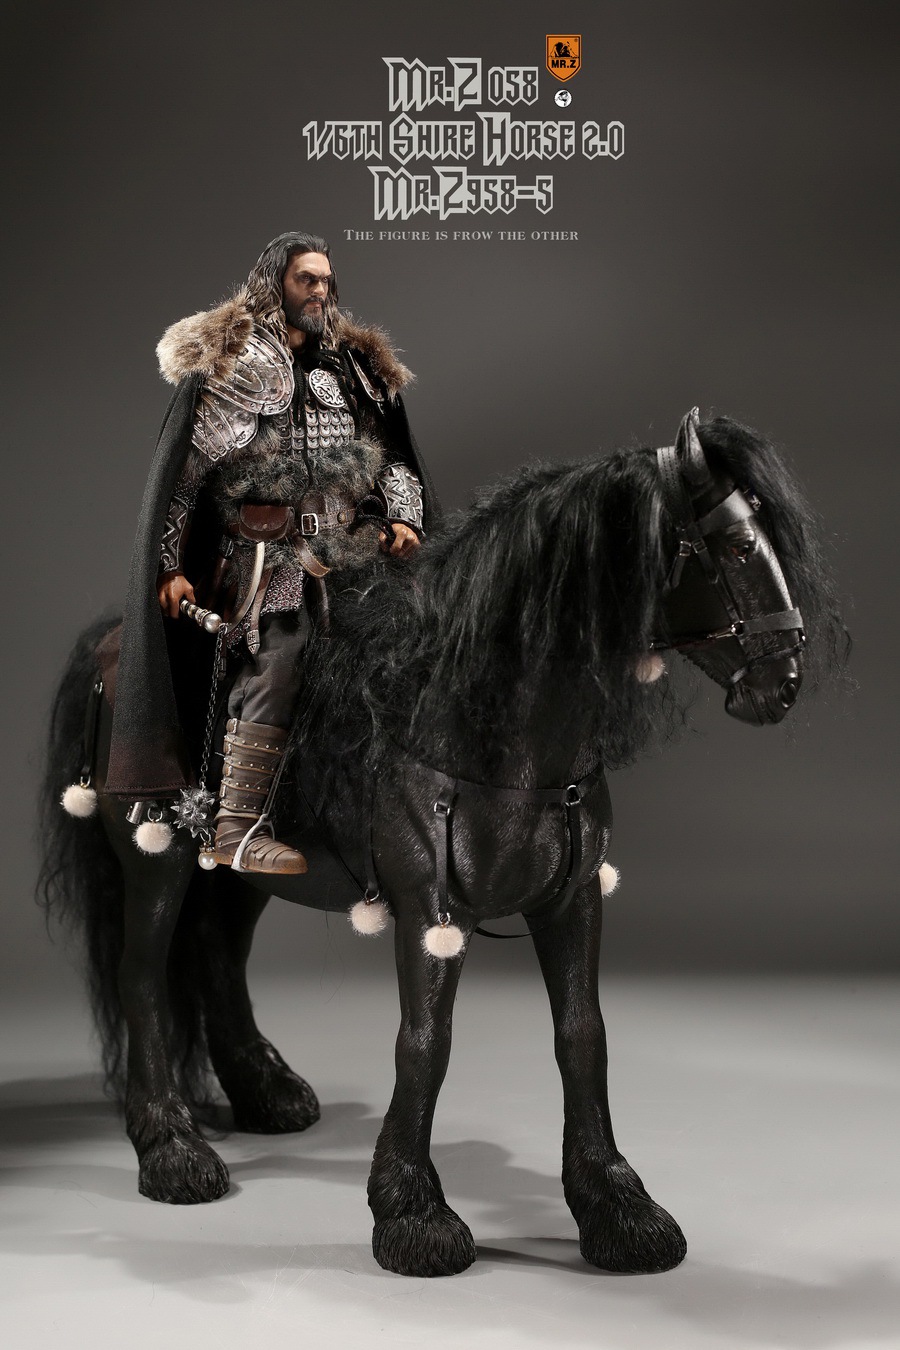 NEW PRODUCT: MR. Z: 58th round-Shire Horse 2.0 version full set of 5 colors  08580011